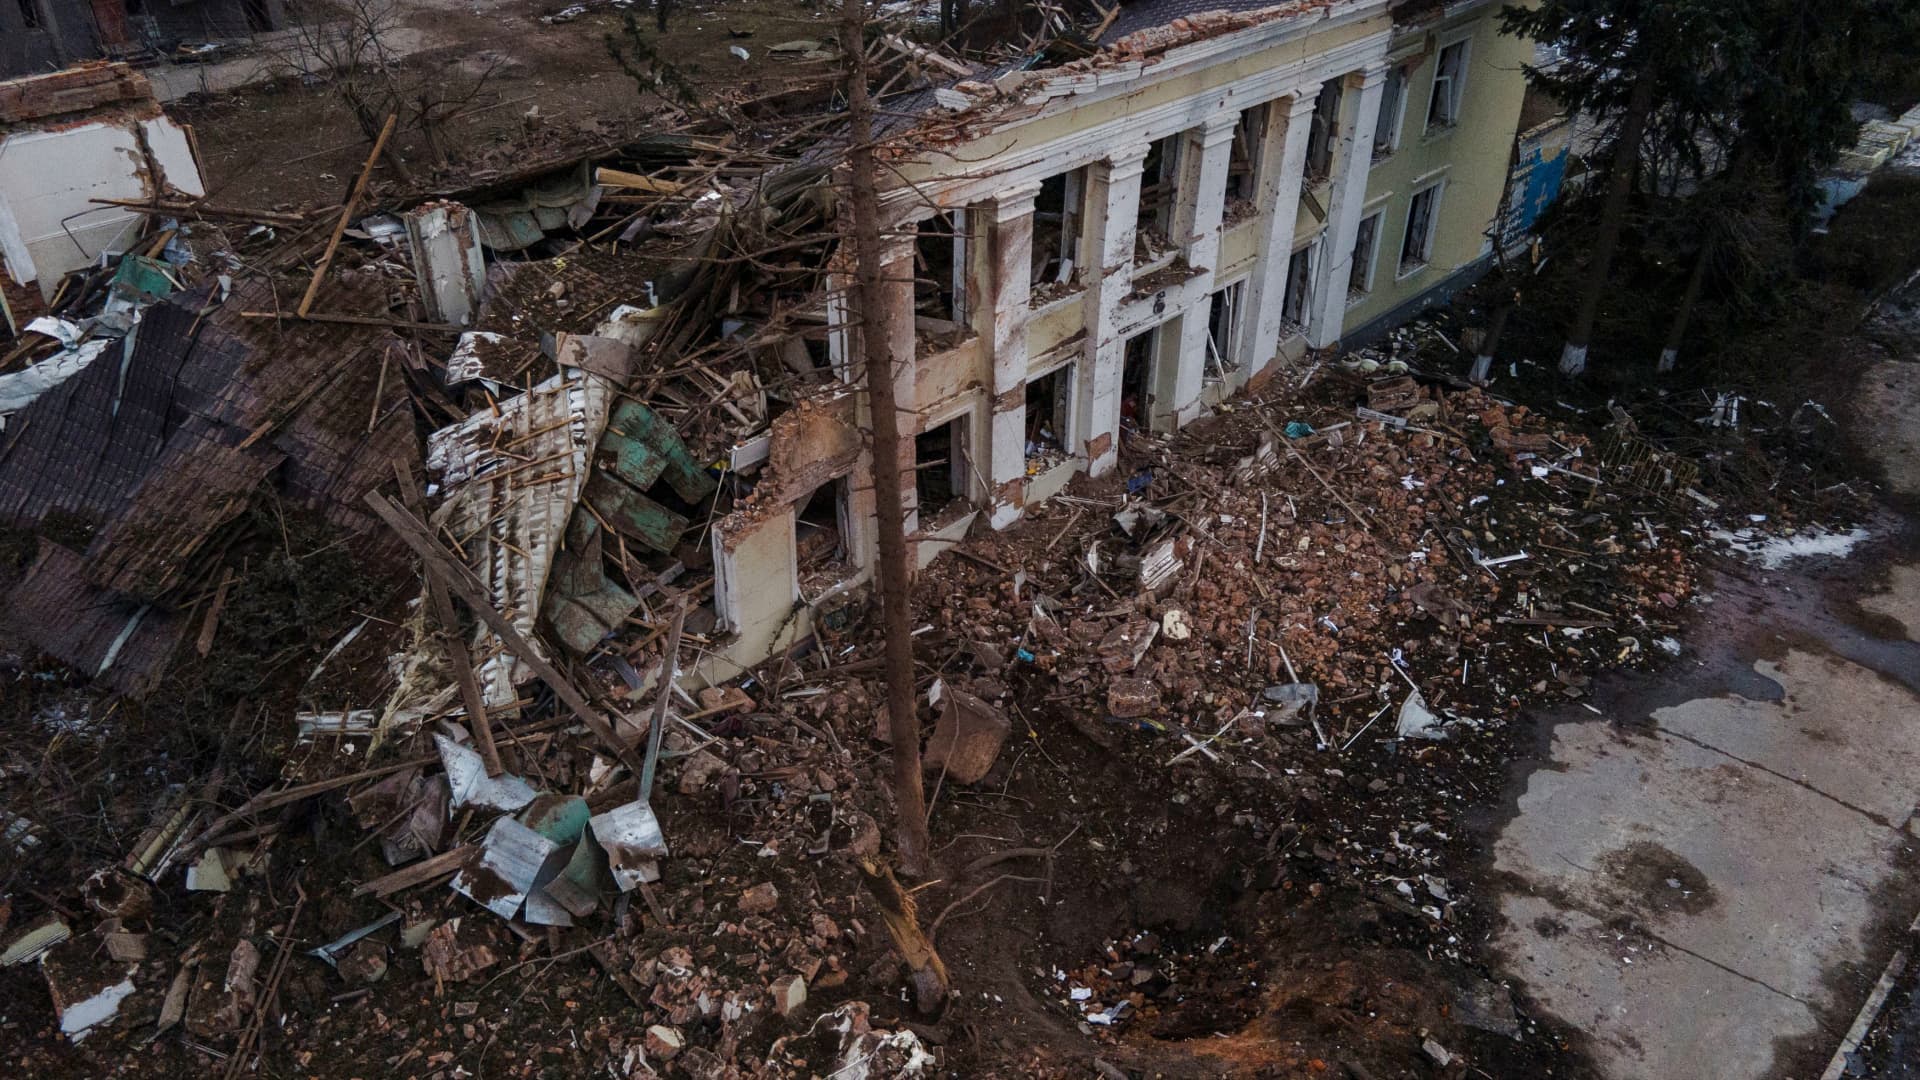 A view shows a building destroyed by an air strike, as Russia's attack on Ukraine continues, in the town of Okhtyrka, in the Sumy region, Ukraine March 14, 2022.